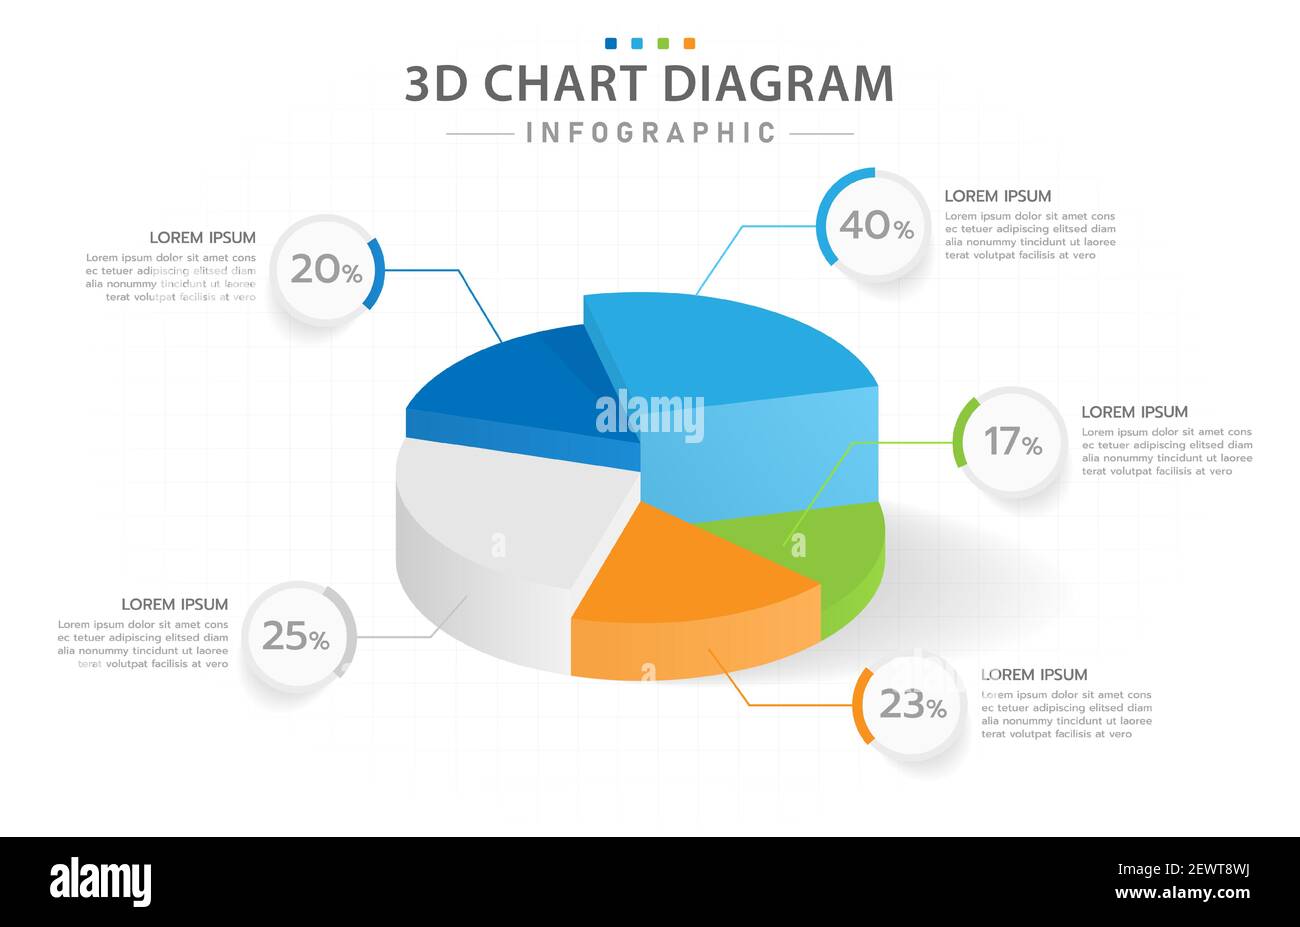 Hdhdhdhdh  Poster, Pie chart, Diagram